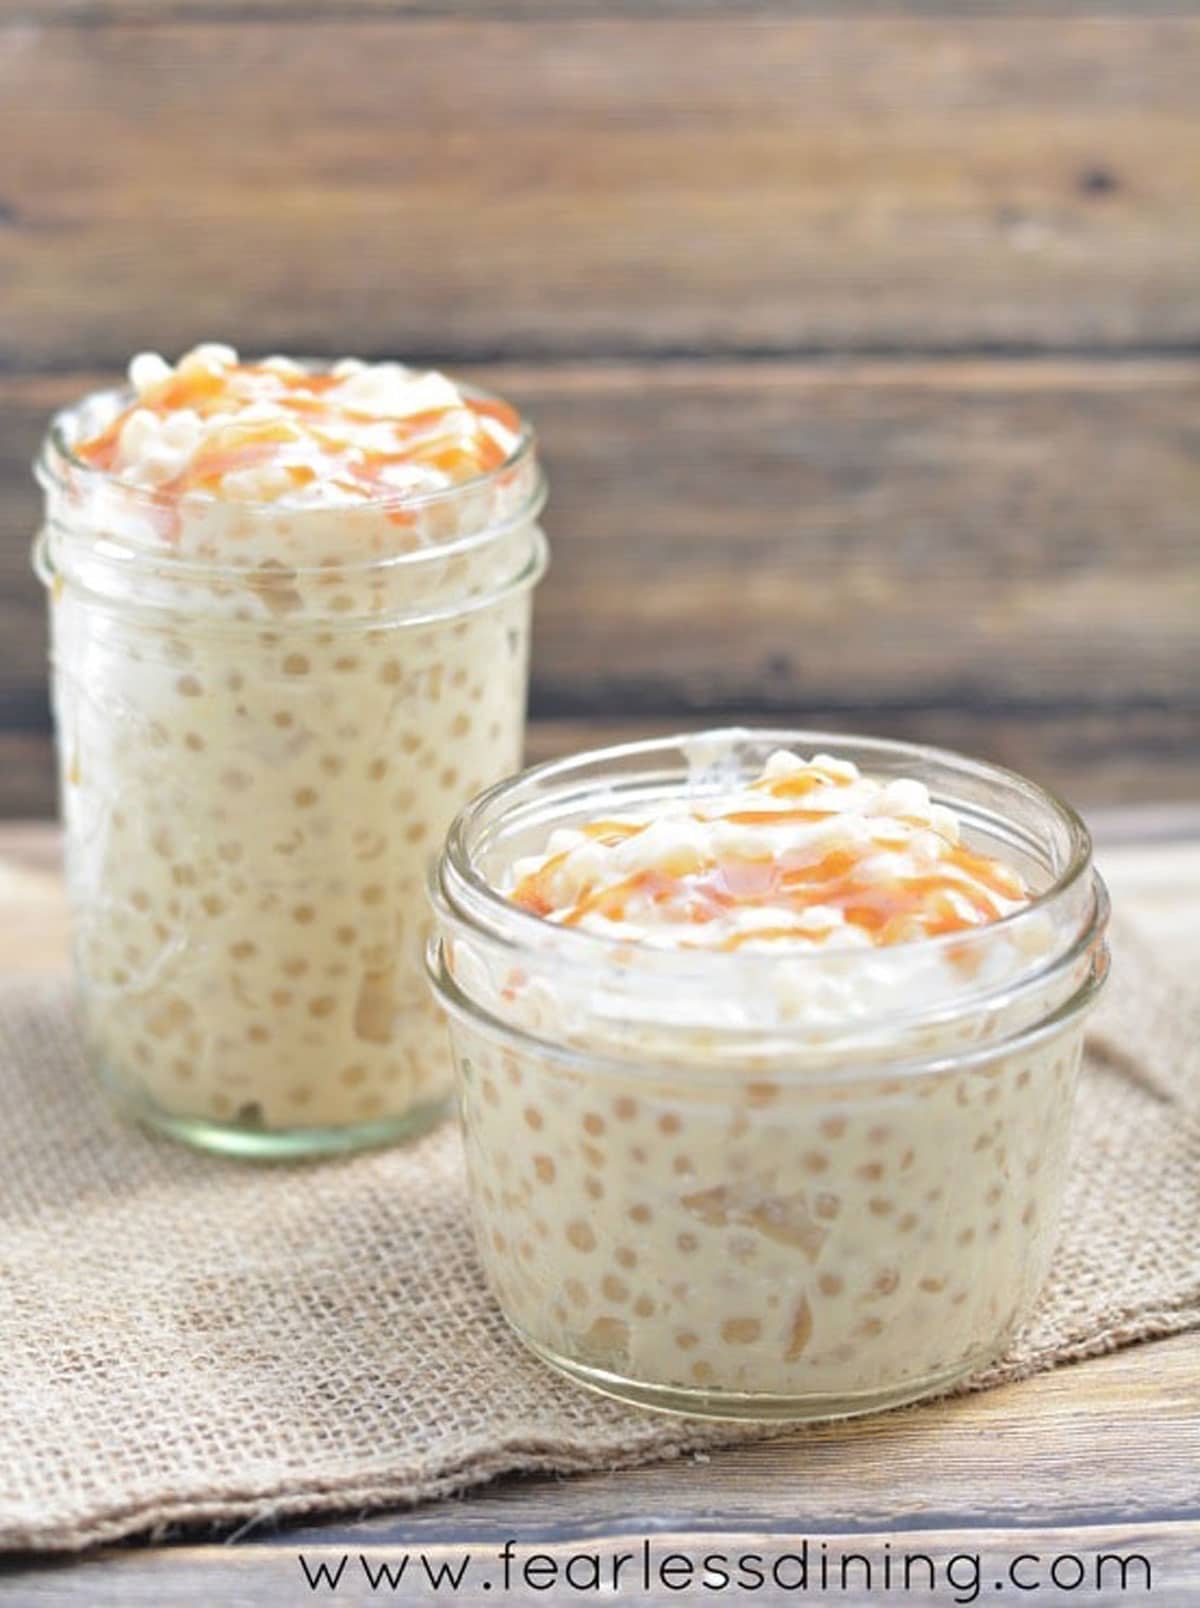 Two jars filled with tapioca pudding.